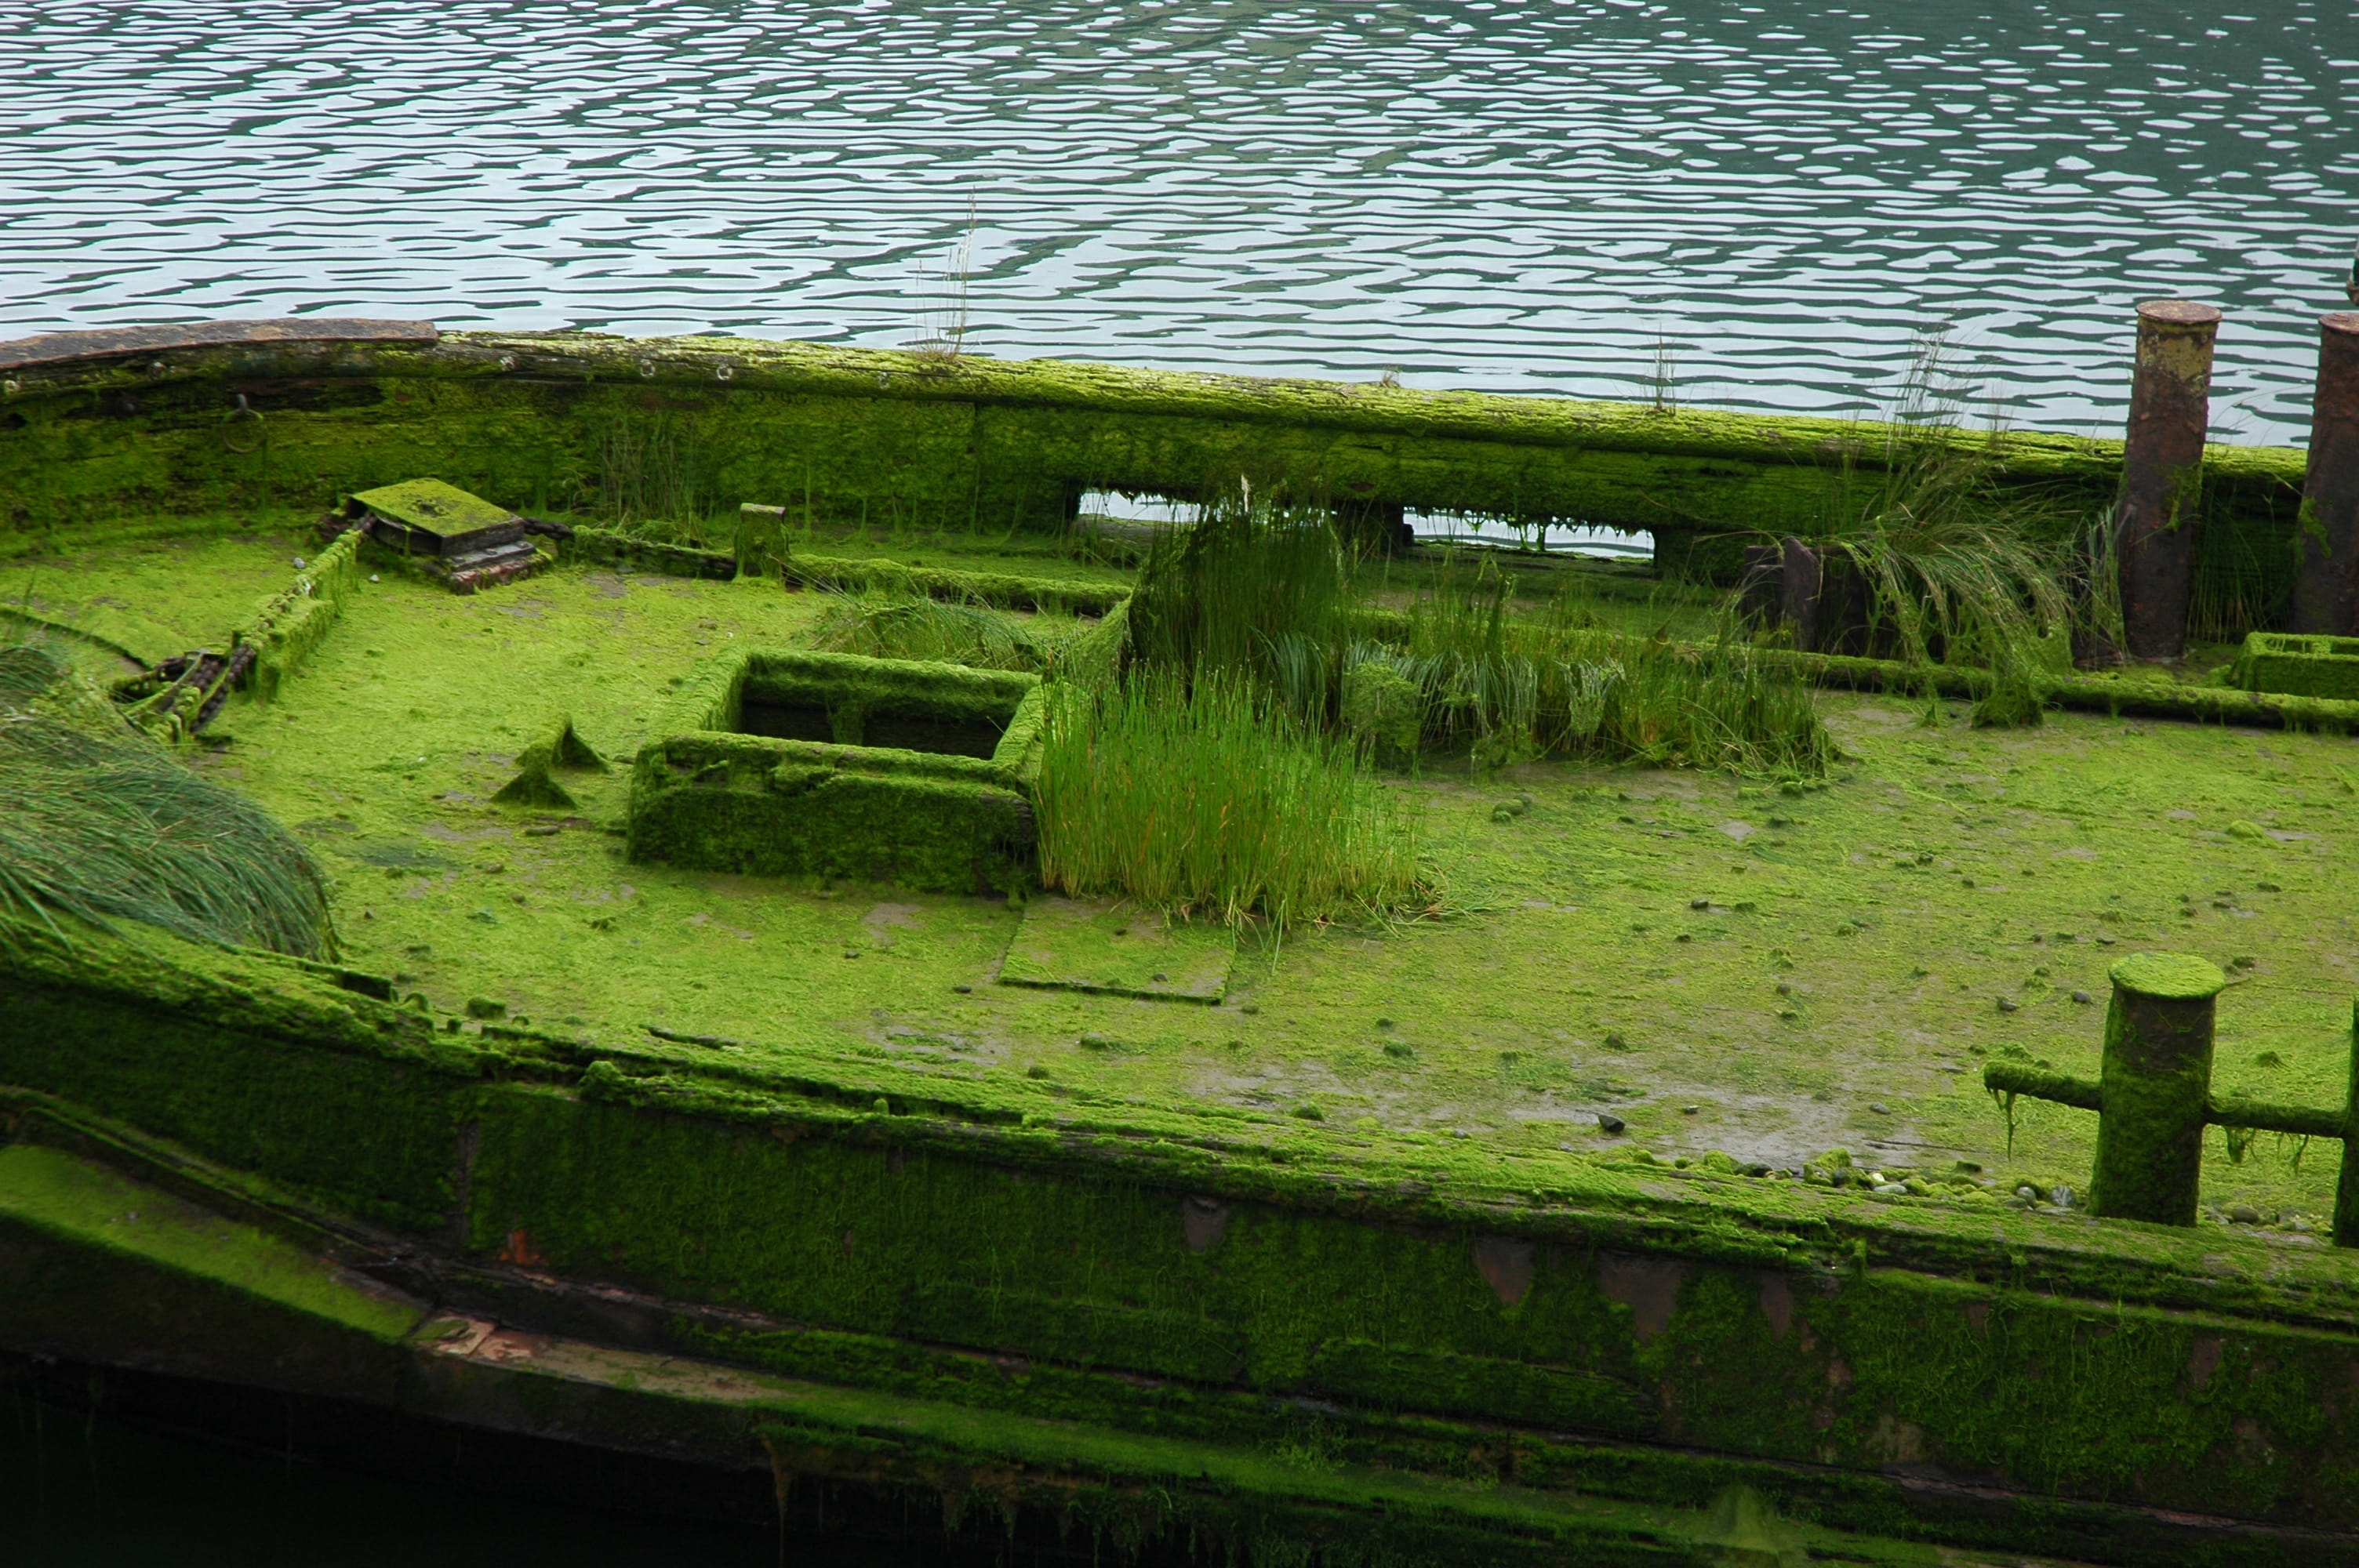 usa, grass, green, decay, treasure, exposed, river, West coast